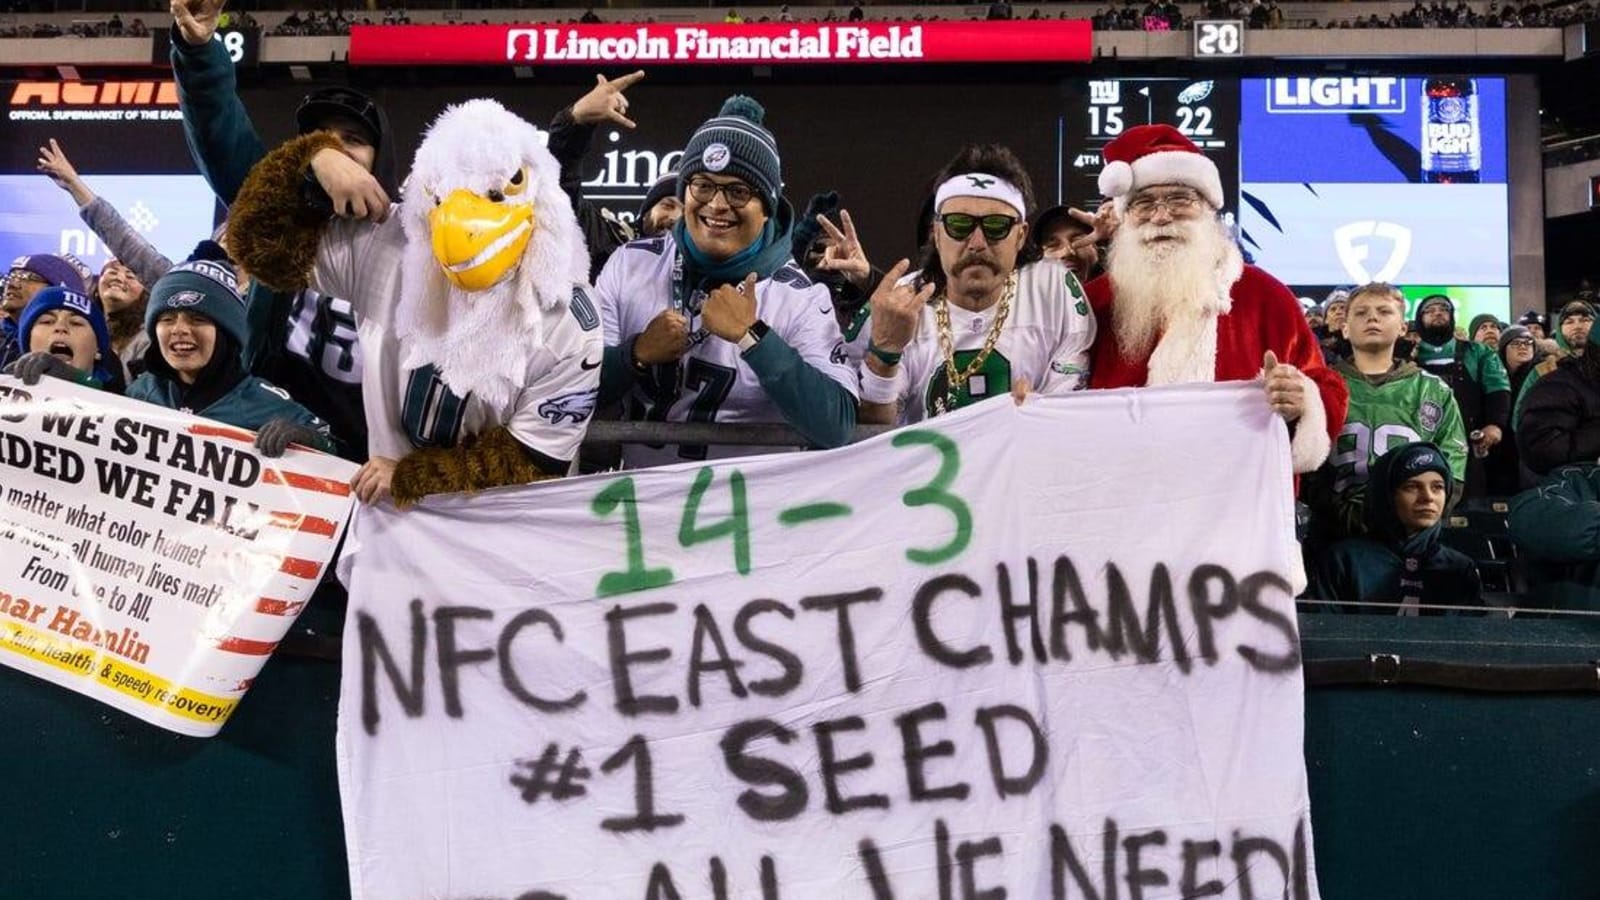 Full NFL playoff picture: Eagles land bye, Dolphins snag wild card